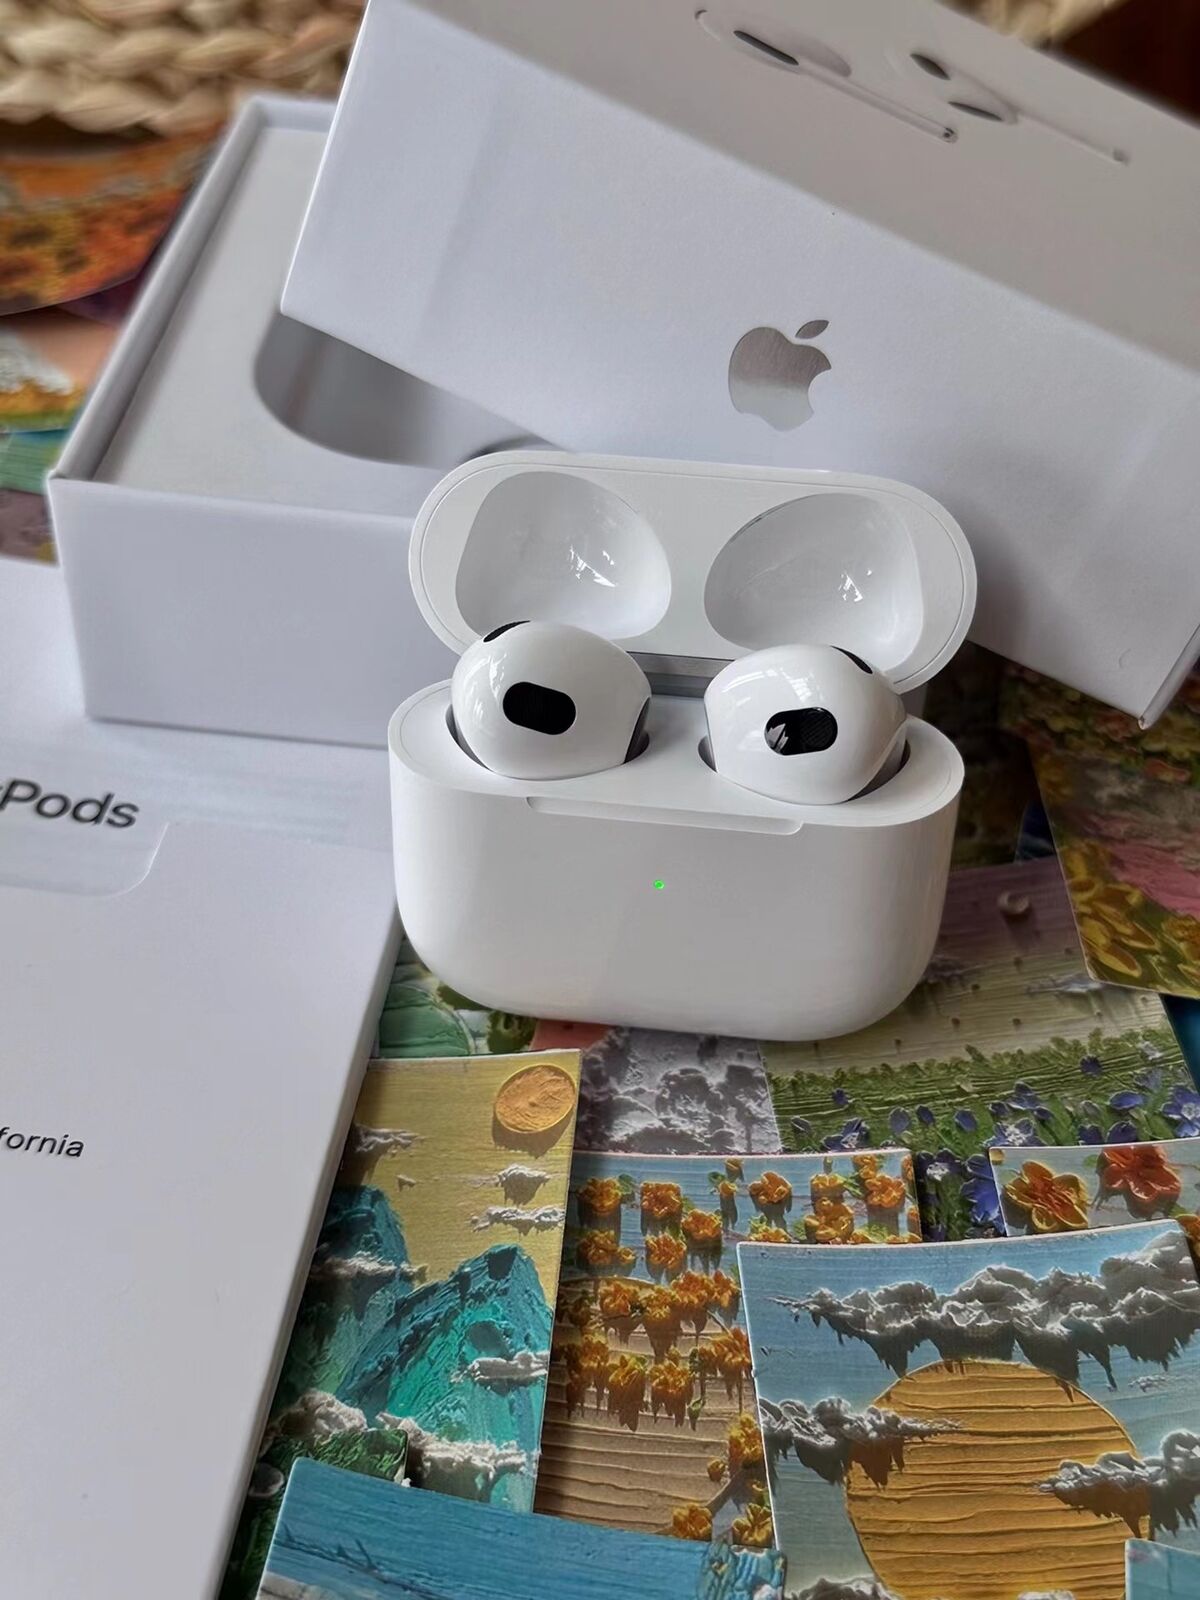 Apple Airpods 3rd Generation with MagSafe Wireless Charging Case White - US Ship